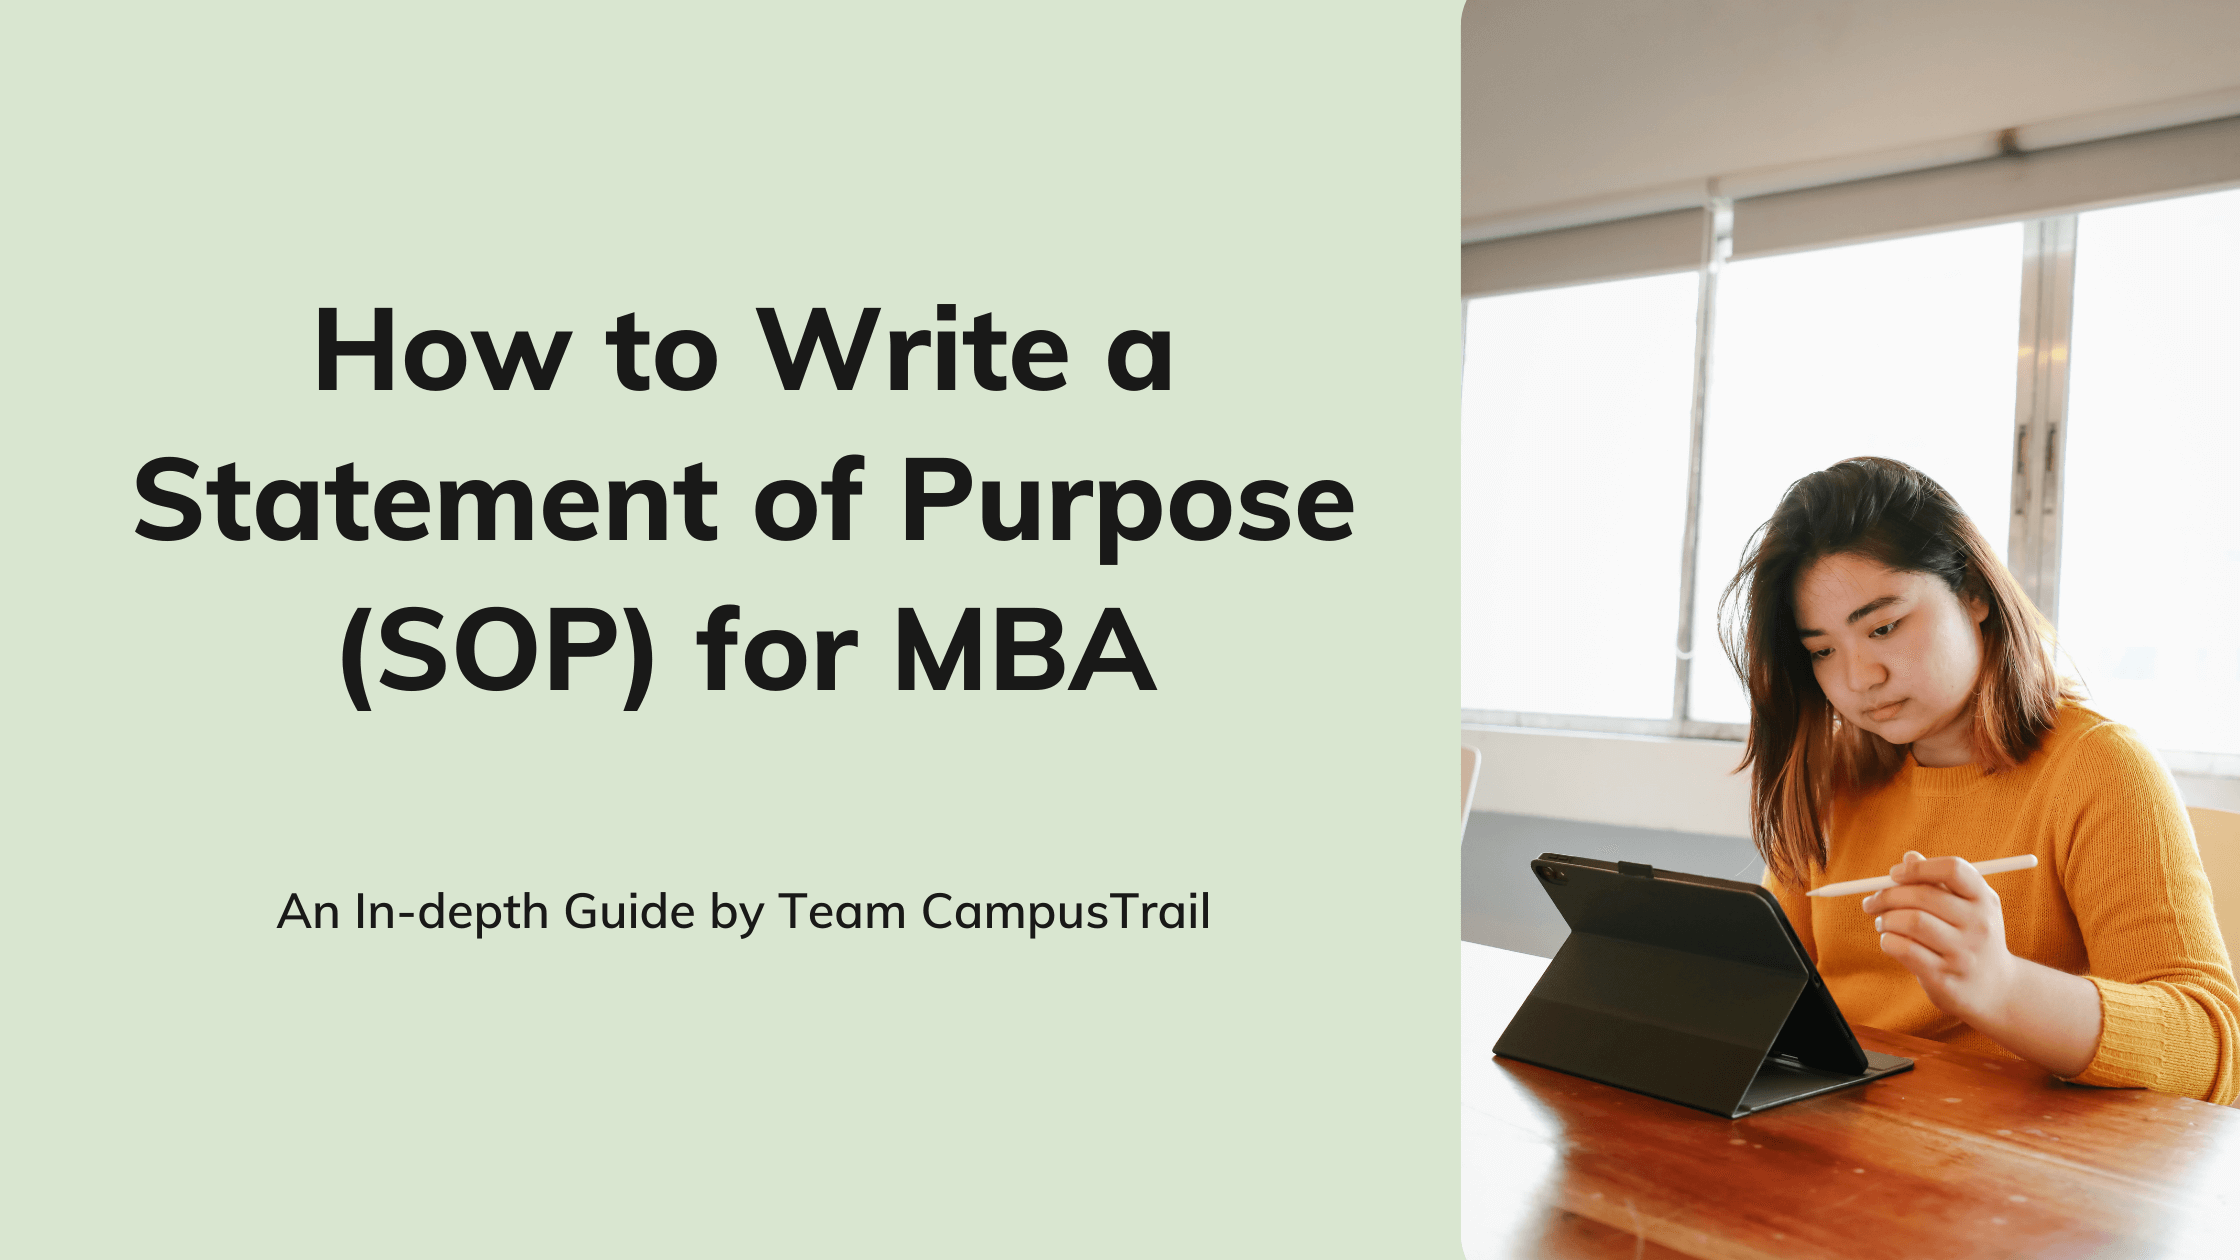 How to Write a Statement of Purpose (SOP) for MBA